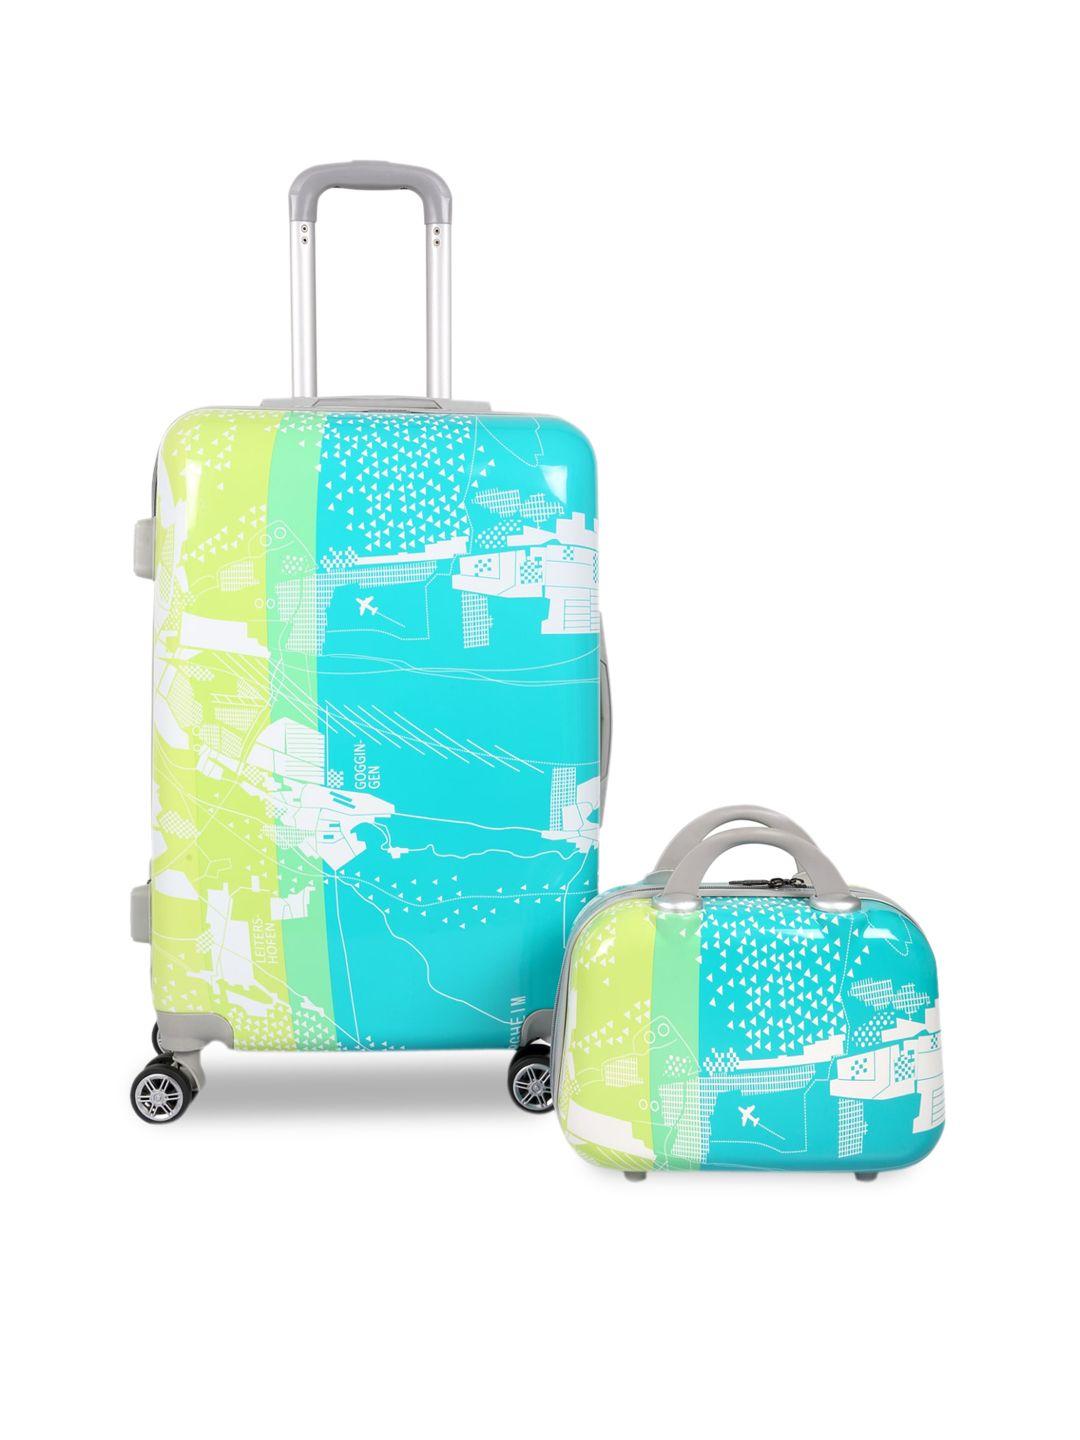 polo class green & blue set of hard case printed trolley bag with vanity  bag